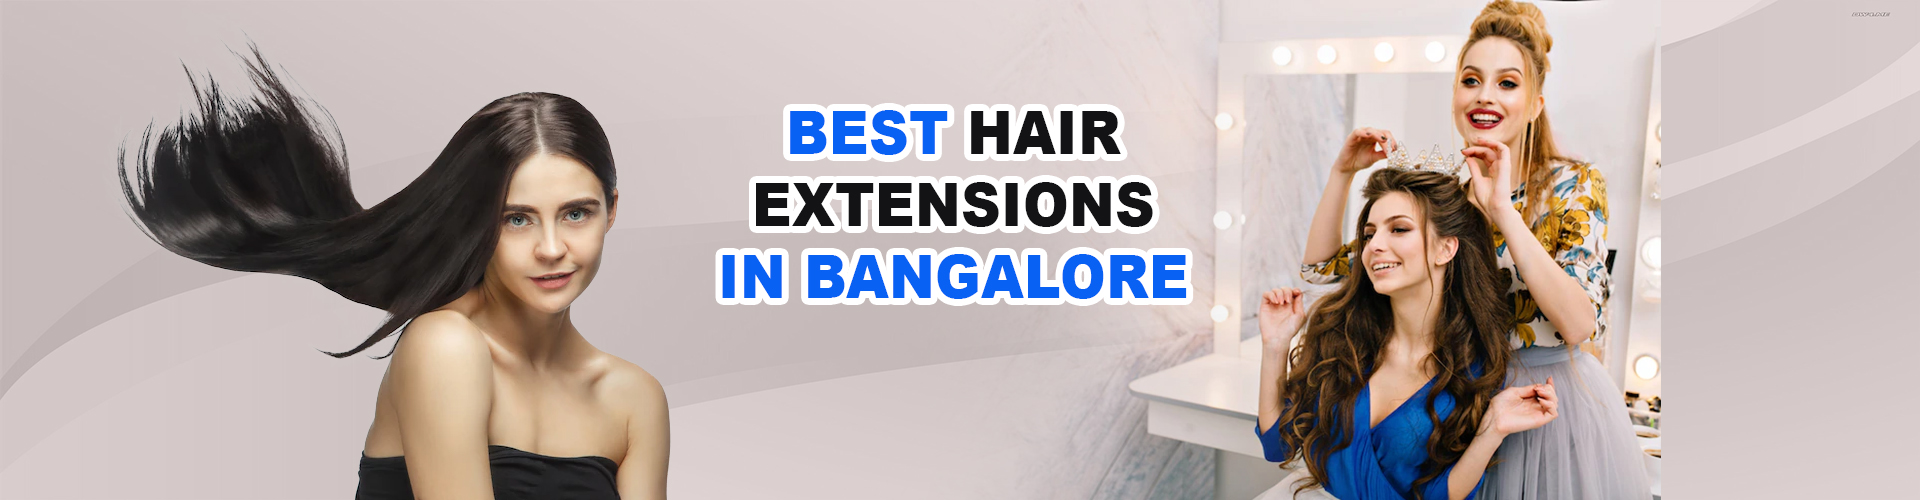 Best Hair extensions in Bangalore, Hair Extensions near me